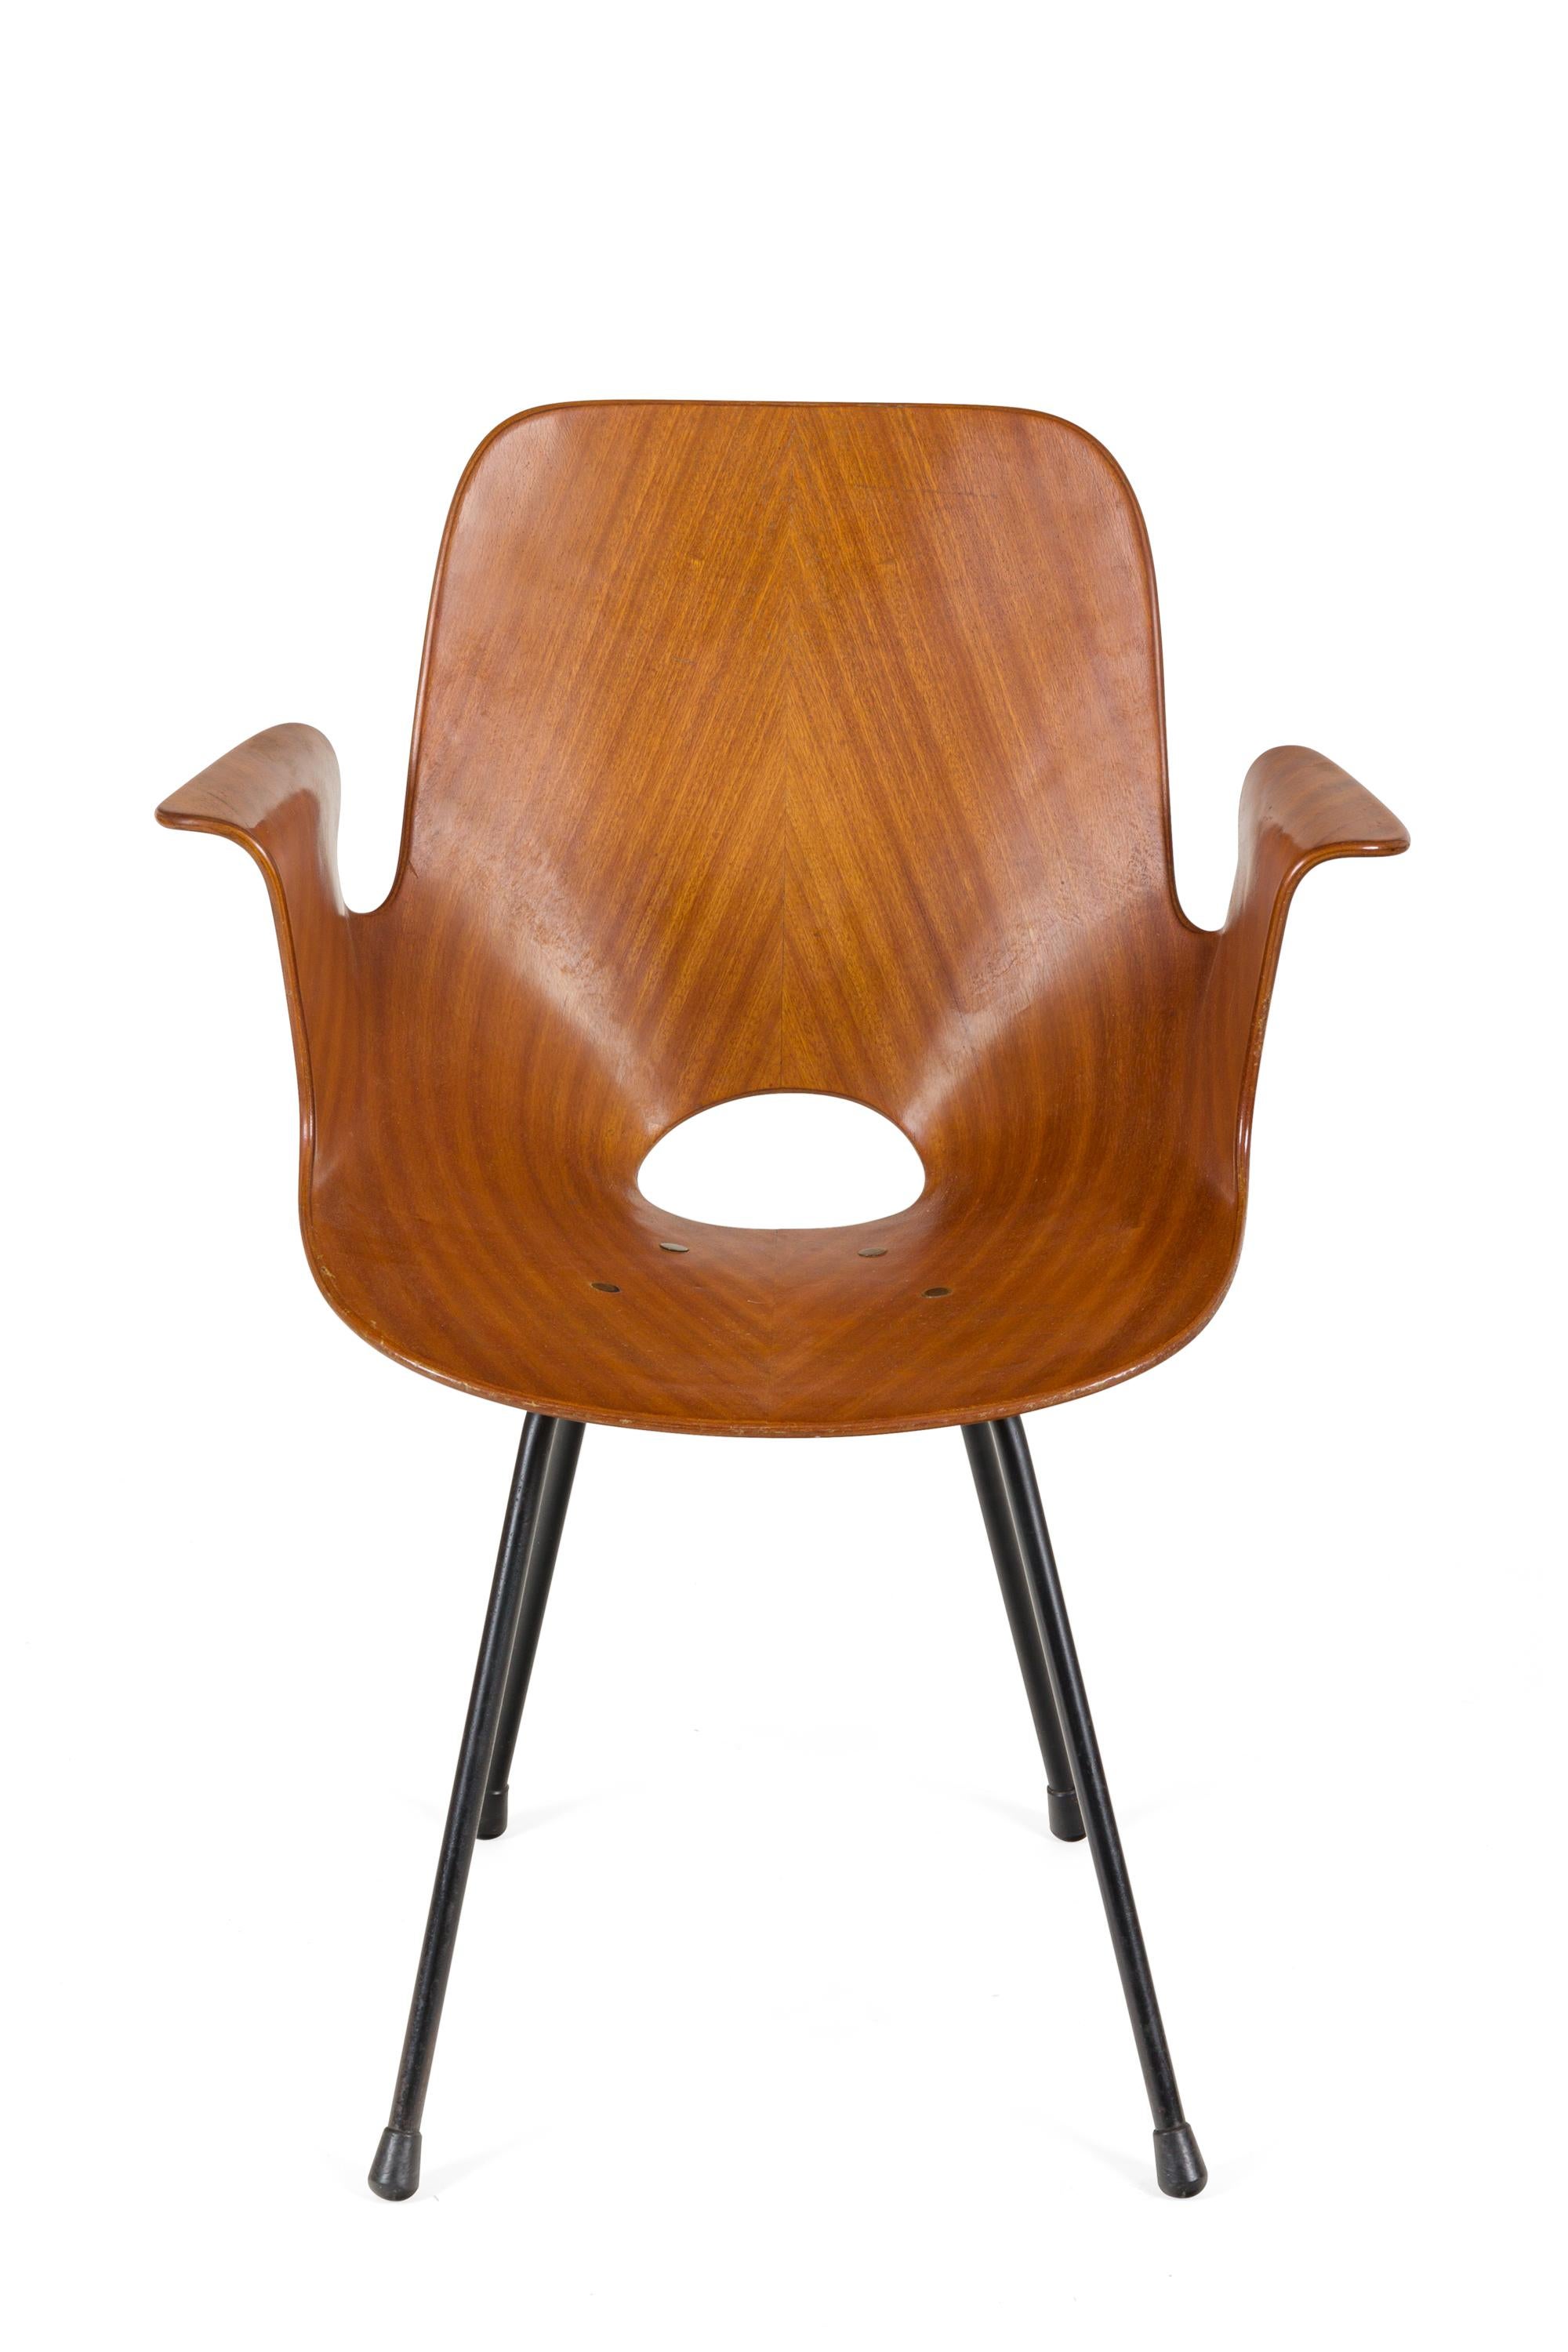 The Medea chairs by Nobili are an iconic design from the 1950s. More commonly found without the armrests, these chairs add an extra element of comfort while maintaining the unique design. They are made of molded plywood with a mahogany veneer. The